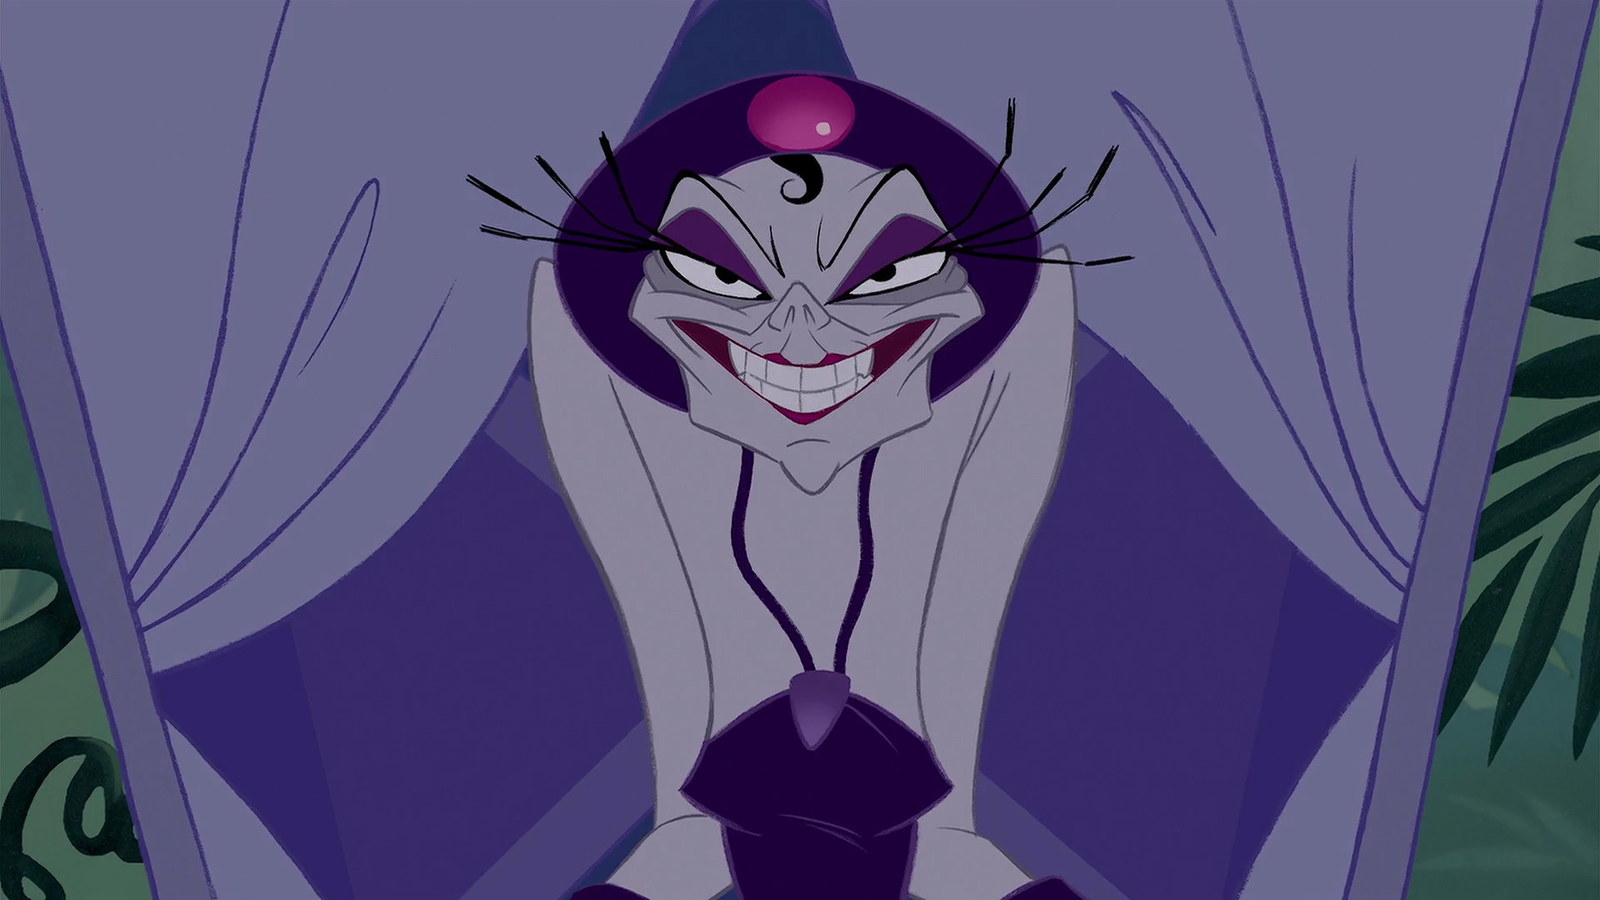 Yzma is a winner, even when she doesn't get her way. 